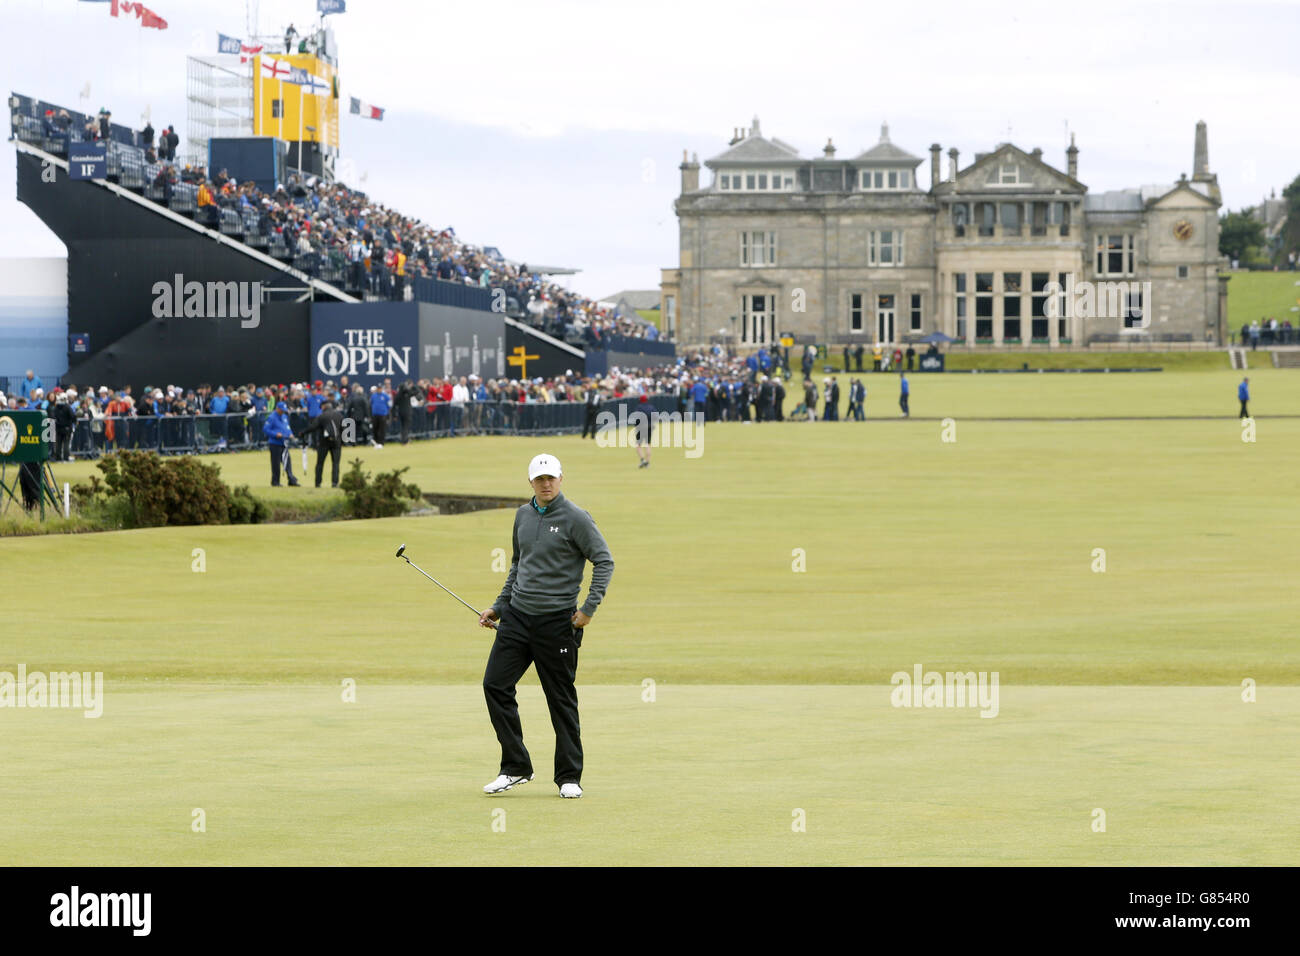 USA's Jordan Spieth lines up a putt on the 1st green during day four of The Open Championship 2015 at St Andrews, Fife. PRESS ASSOCIATION Photo. Picture date: Sunday July 19, 2015. See PA story GOLF Open. Photo credit should read: Danny Lawson/PA Wire. RESTRICTIONS: . Call +44 (0)1158 447447 for further info. Stock Photo